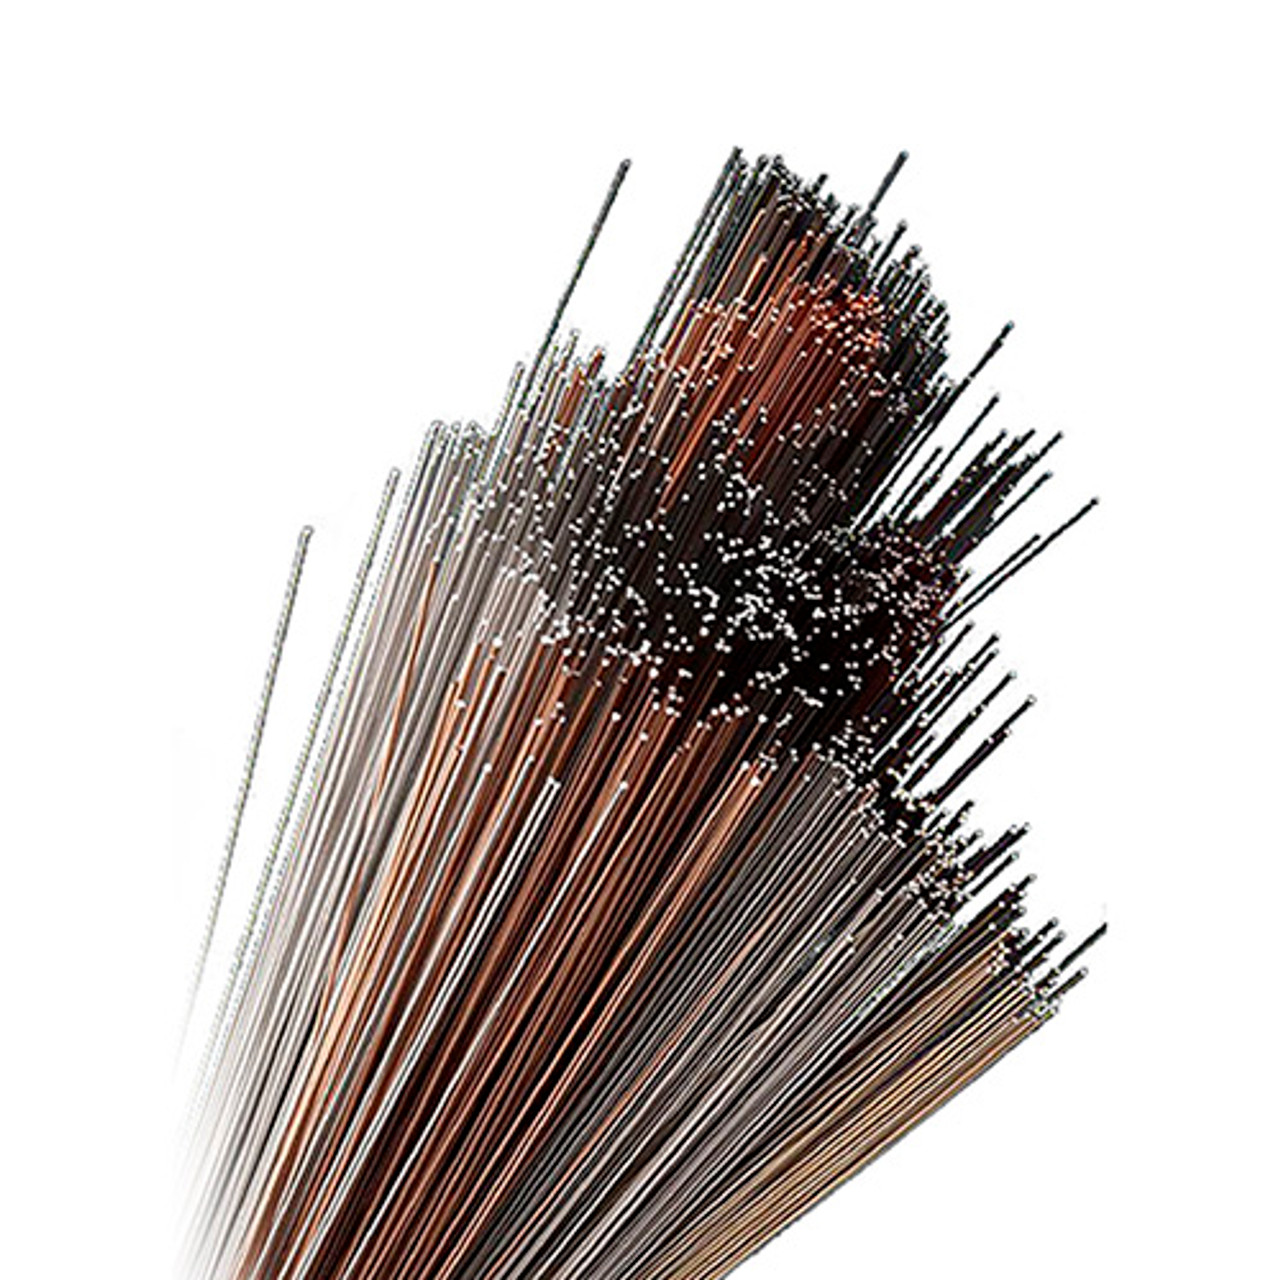 Welding Wire (Pkg. of 25) - 304 Stainless - 0.010" x 18"